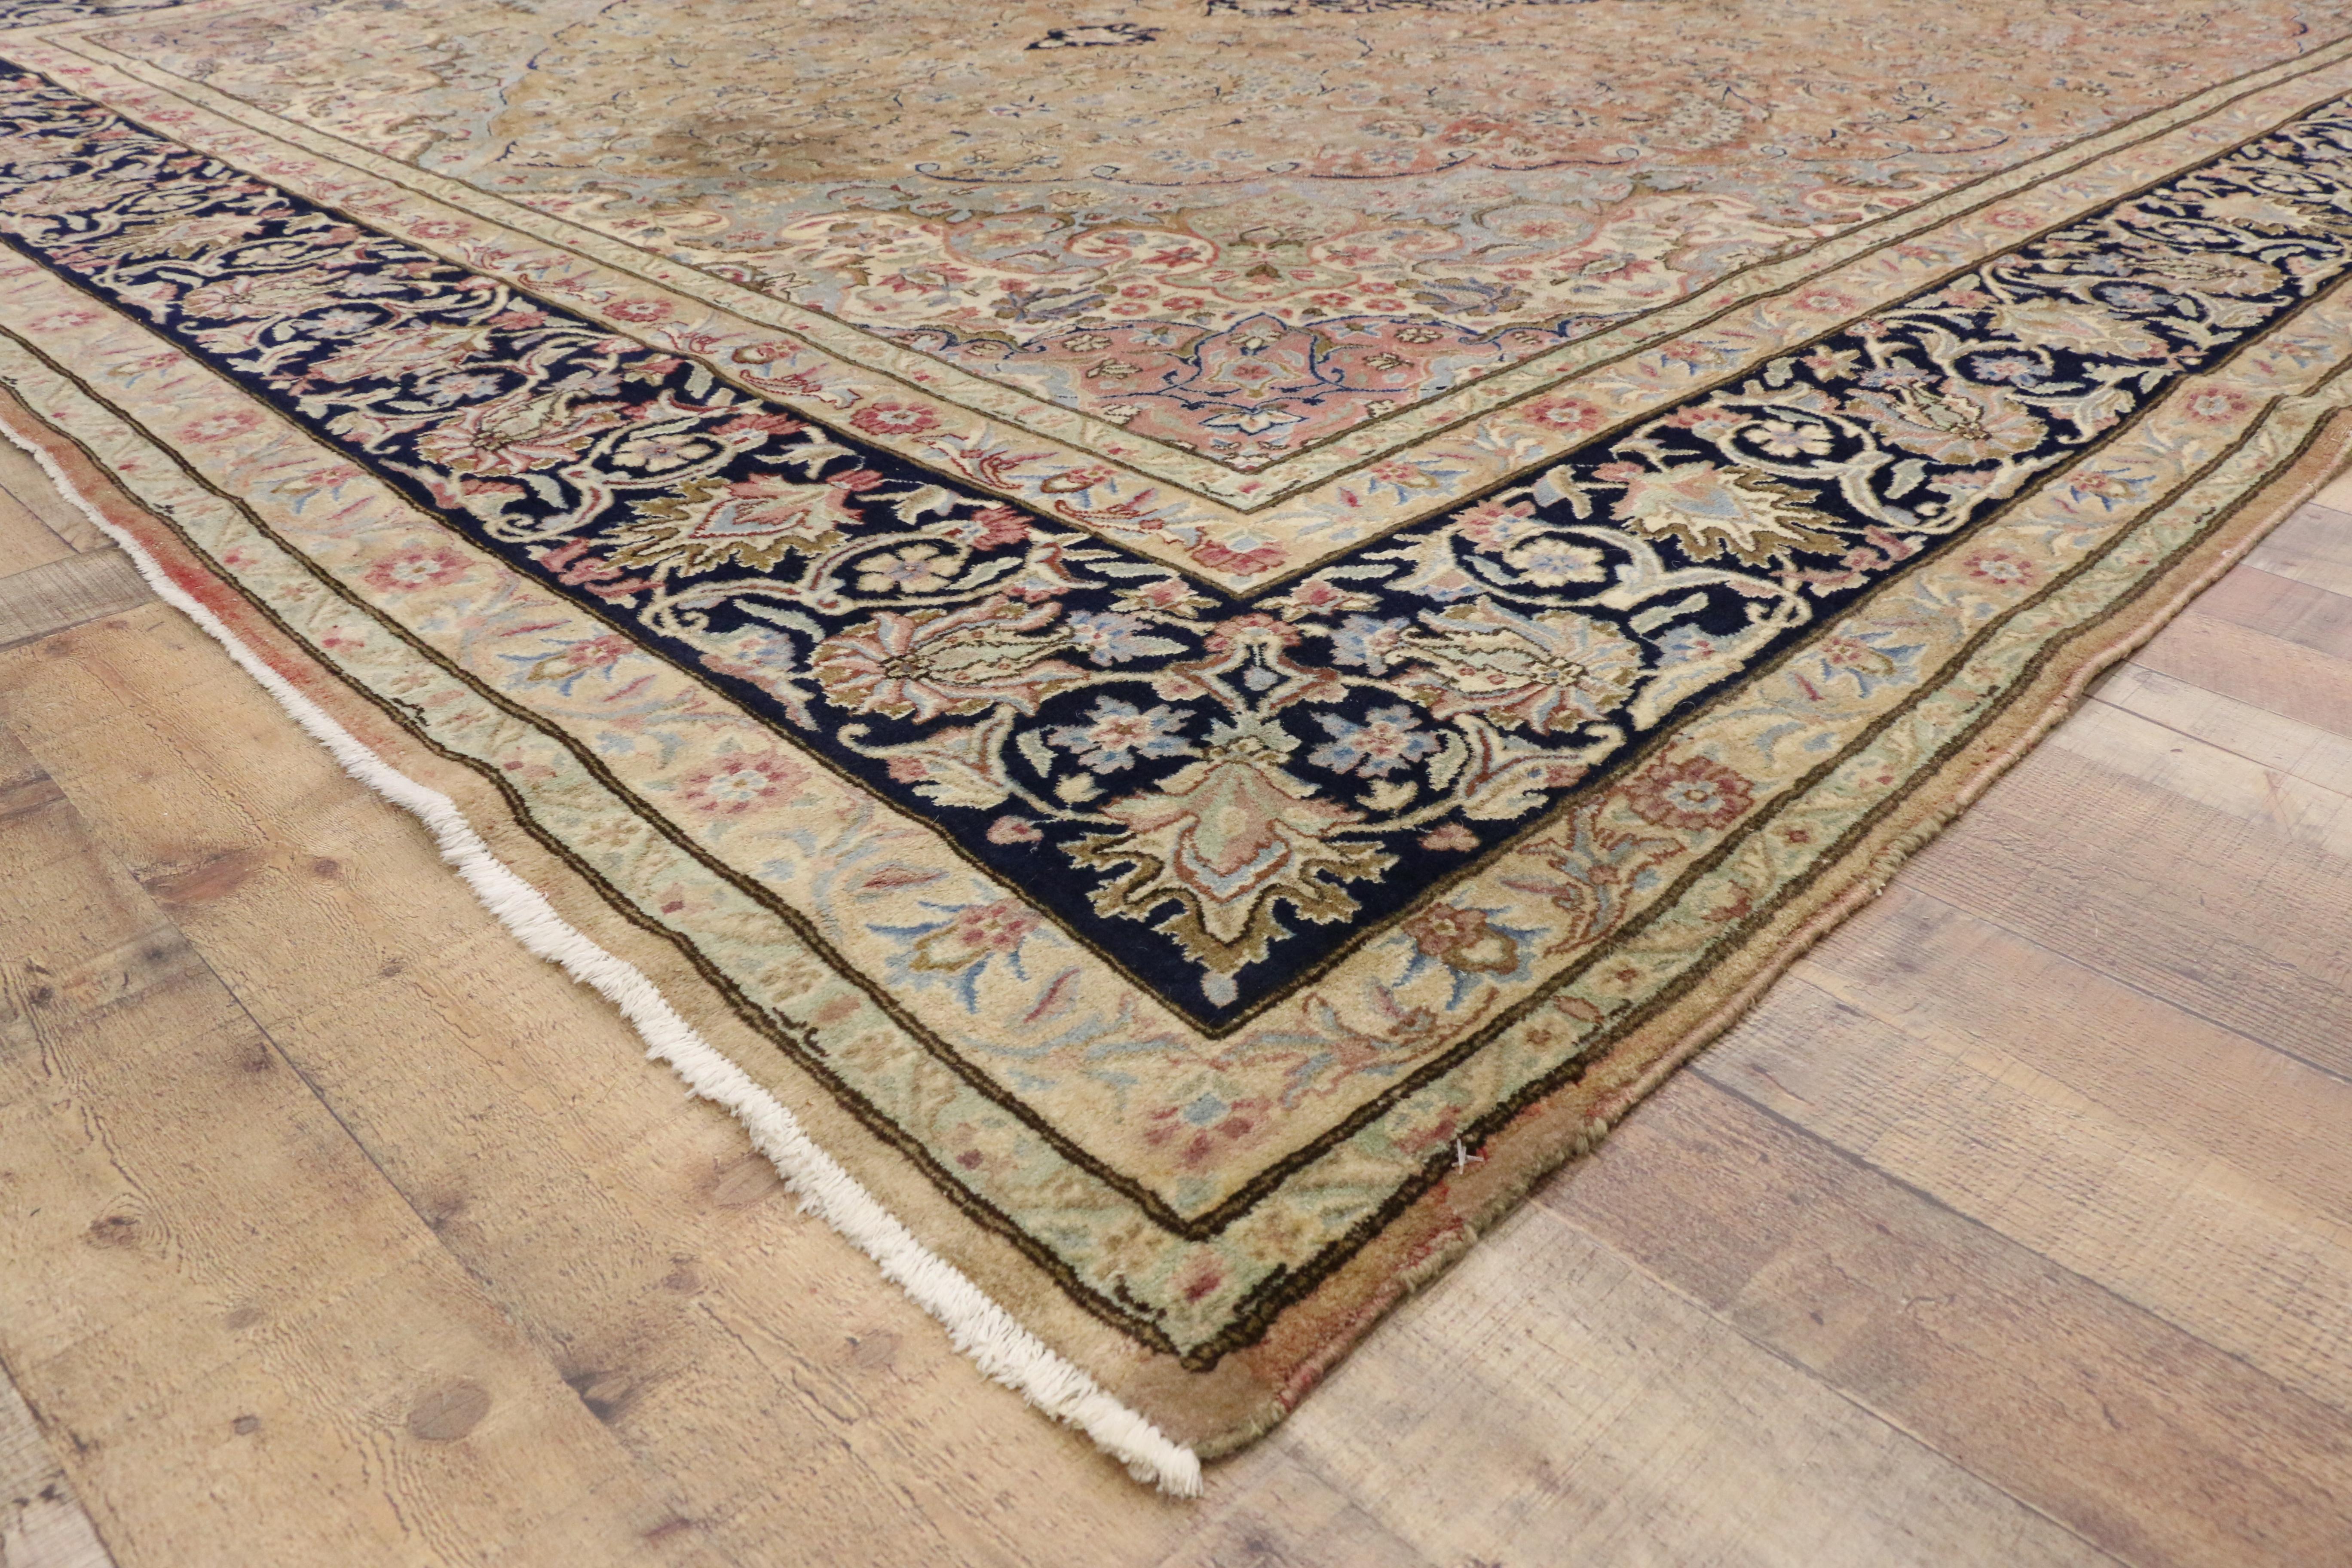 76515, distressed vintage Persian Kerman rug, Vintage Kirman area rug. Delicately weathered and well-loved this vintage Persian Kirman rug possesses a timeless beauty enriched with age. At the center, a 16-point lozenge cusped Kerman medallion is